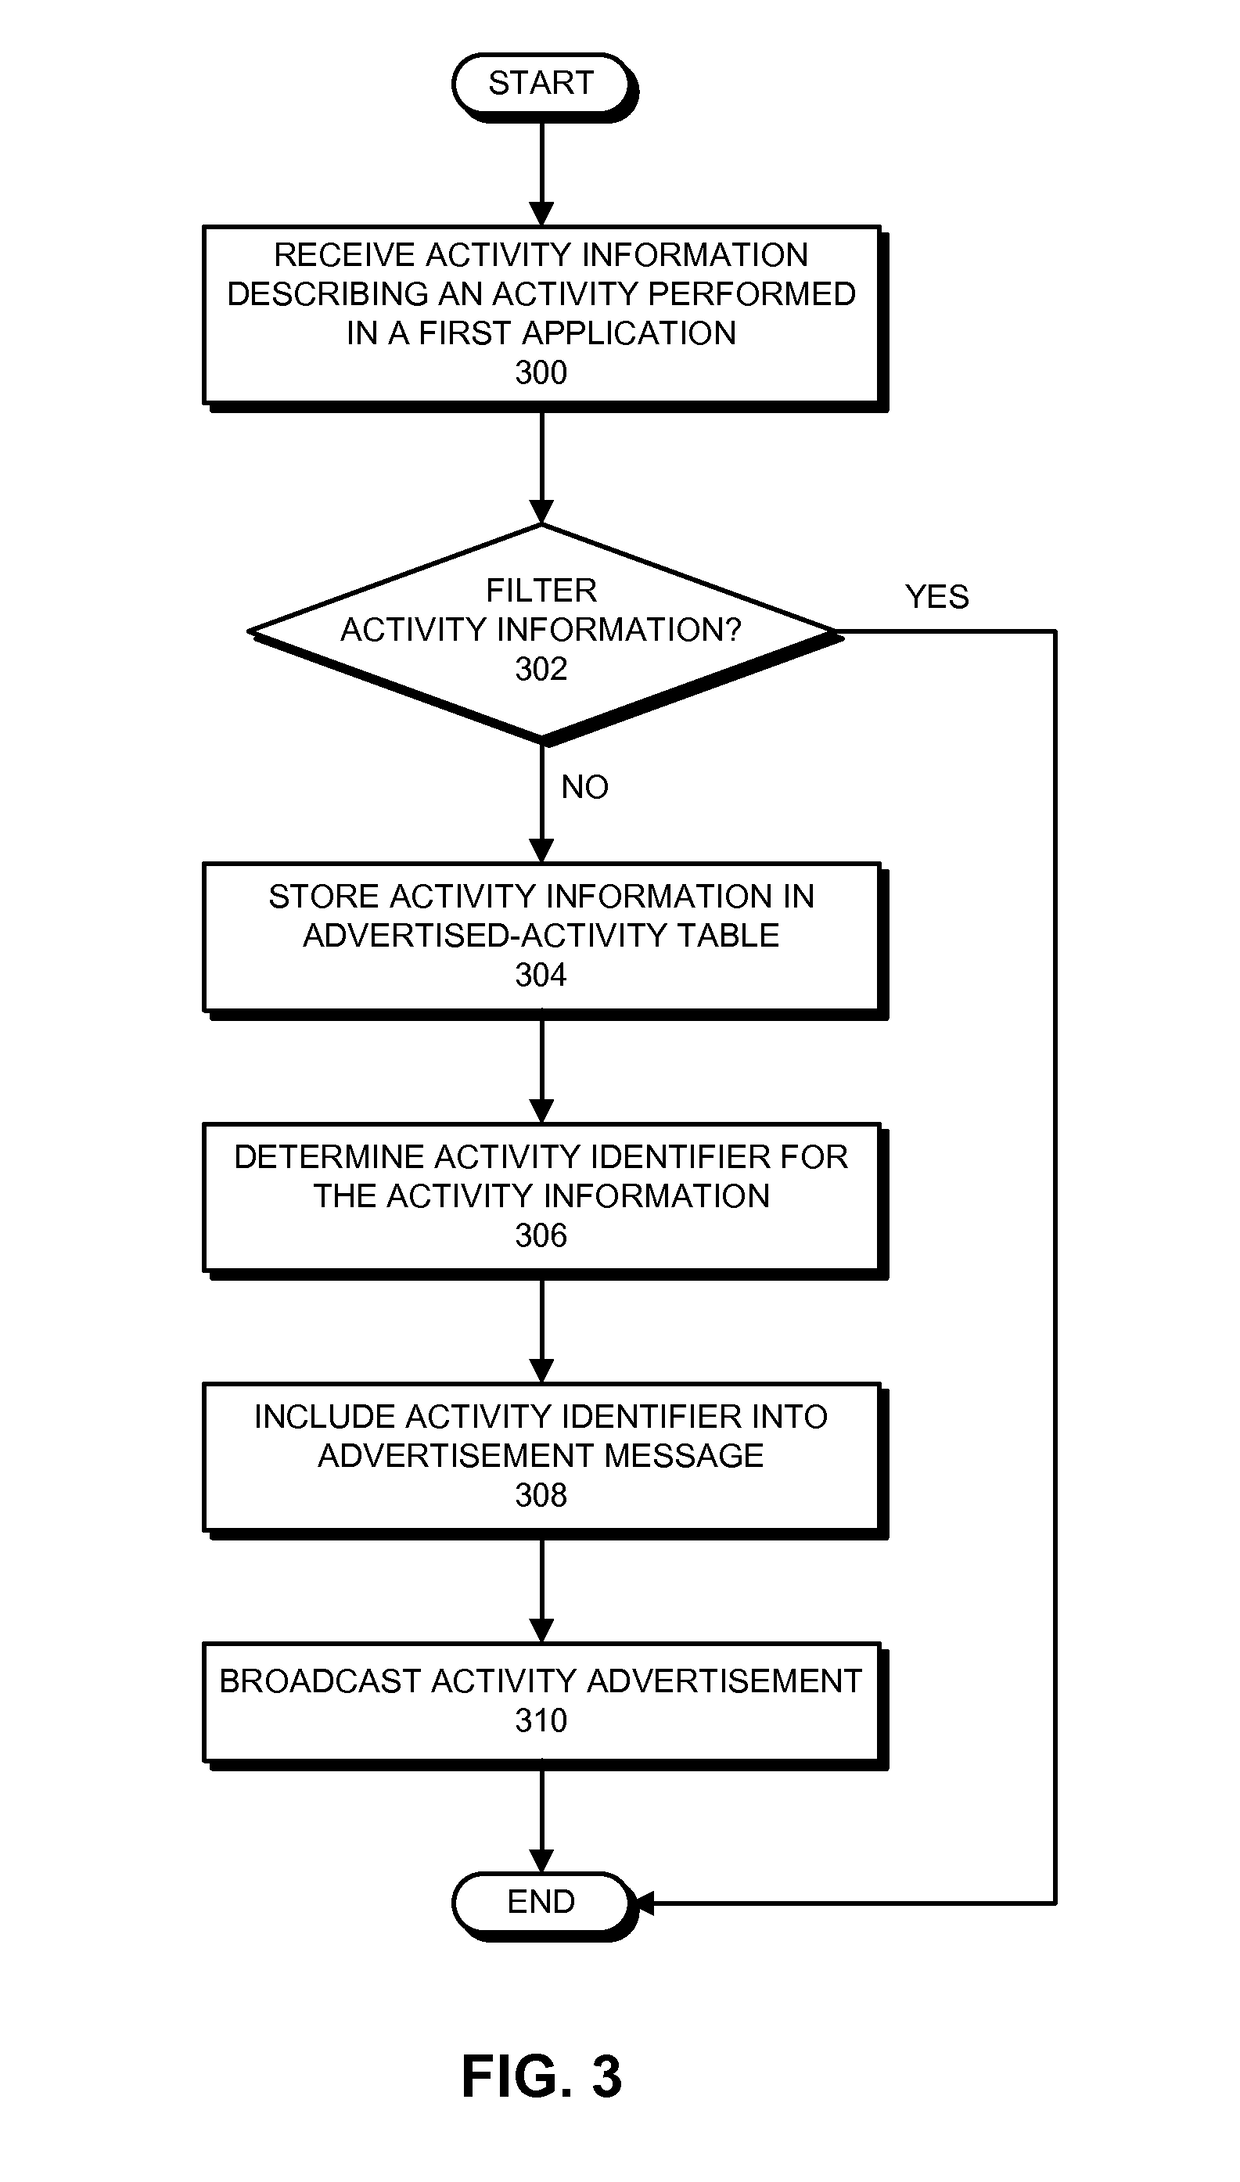 Activity continuation between electronic devices